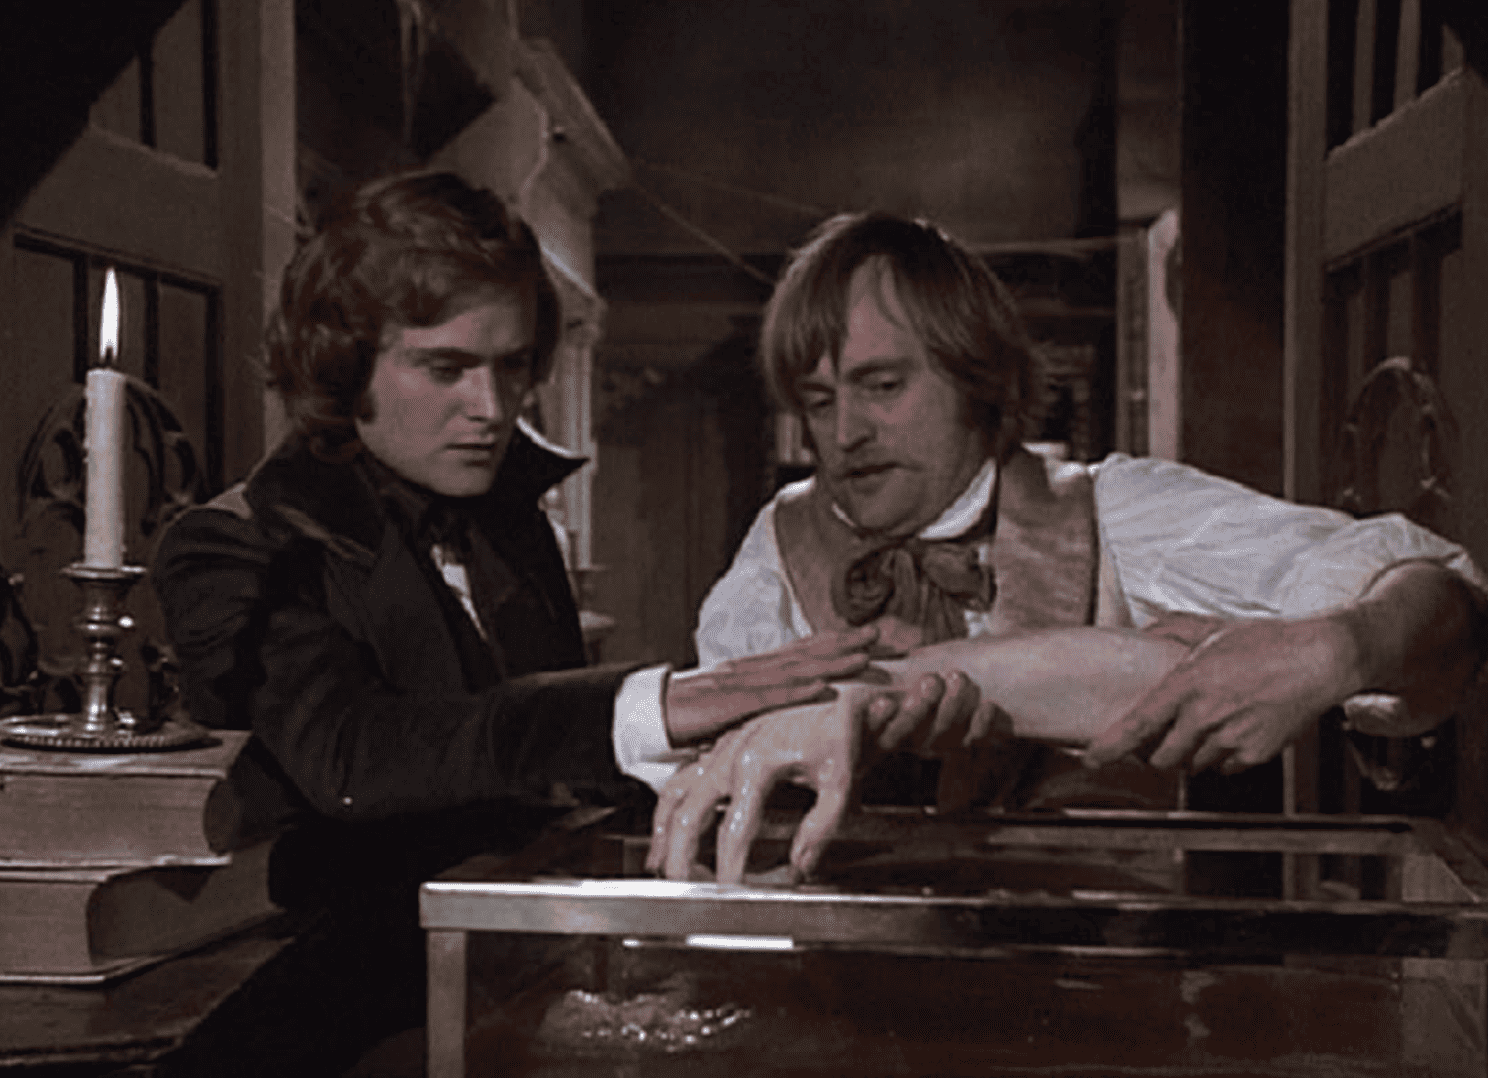 Two men examine a detached hand and forearm in this image from Universal Television.